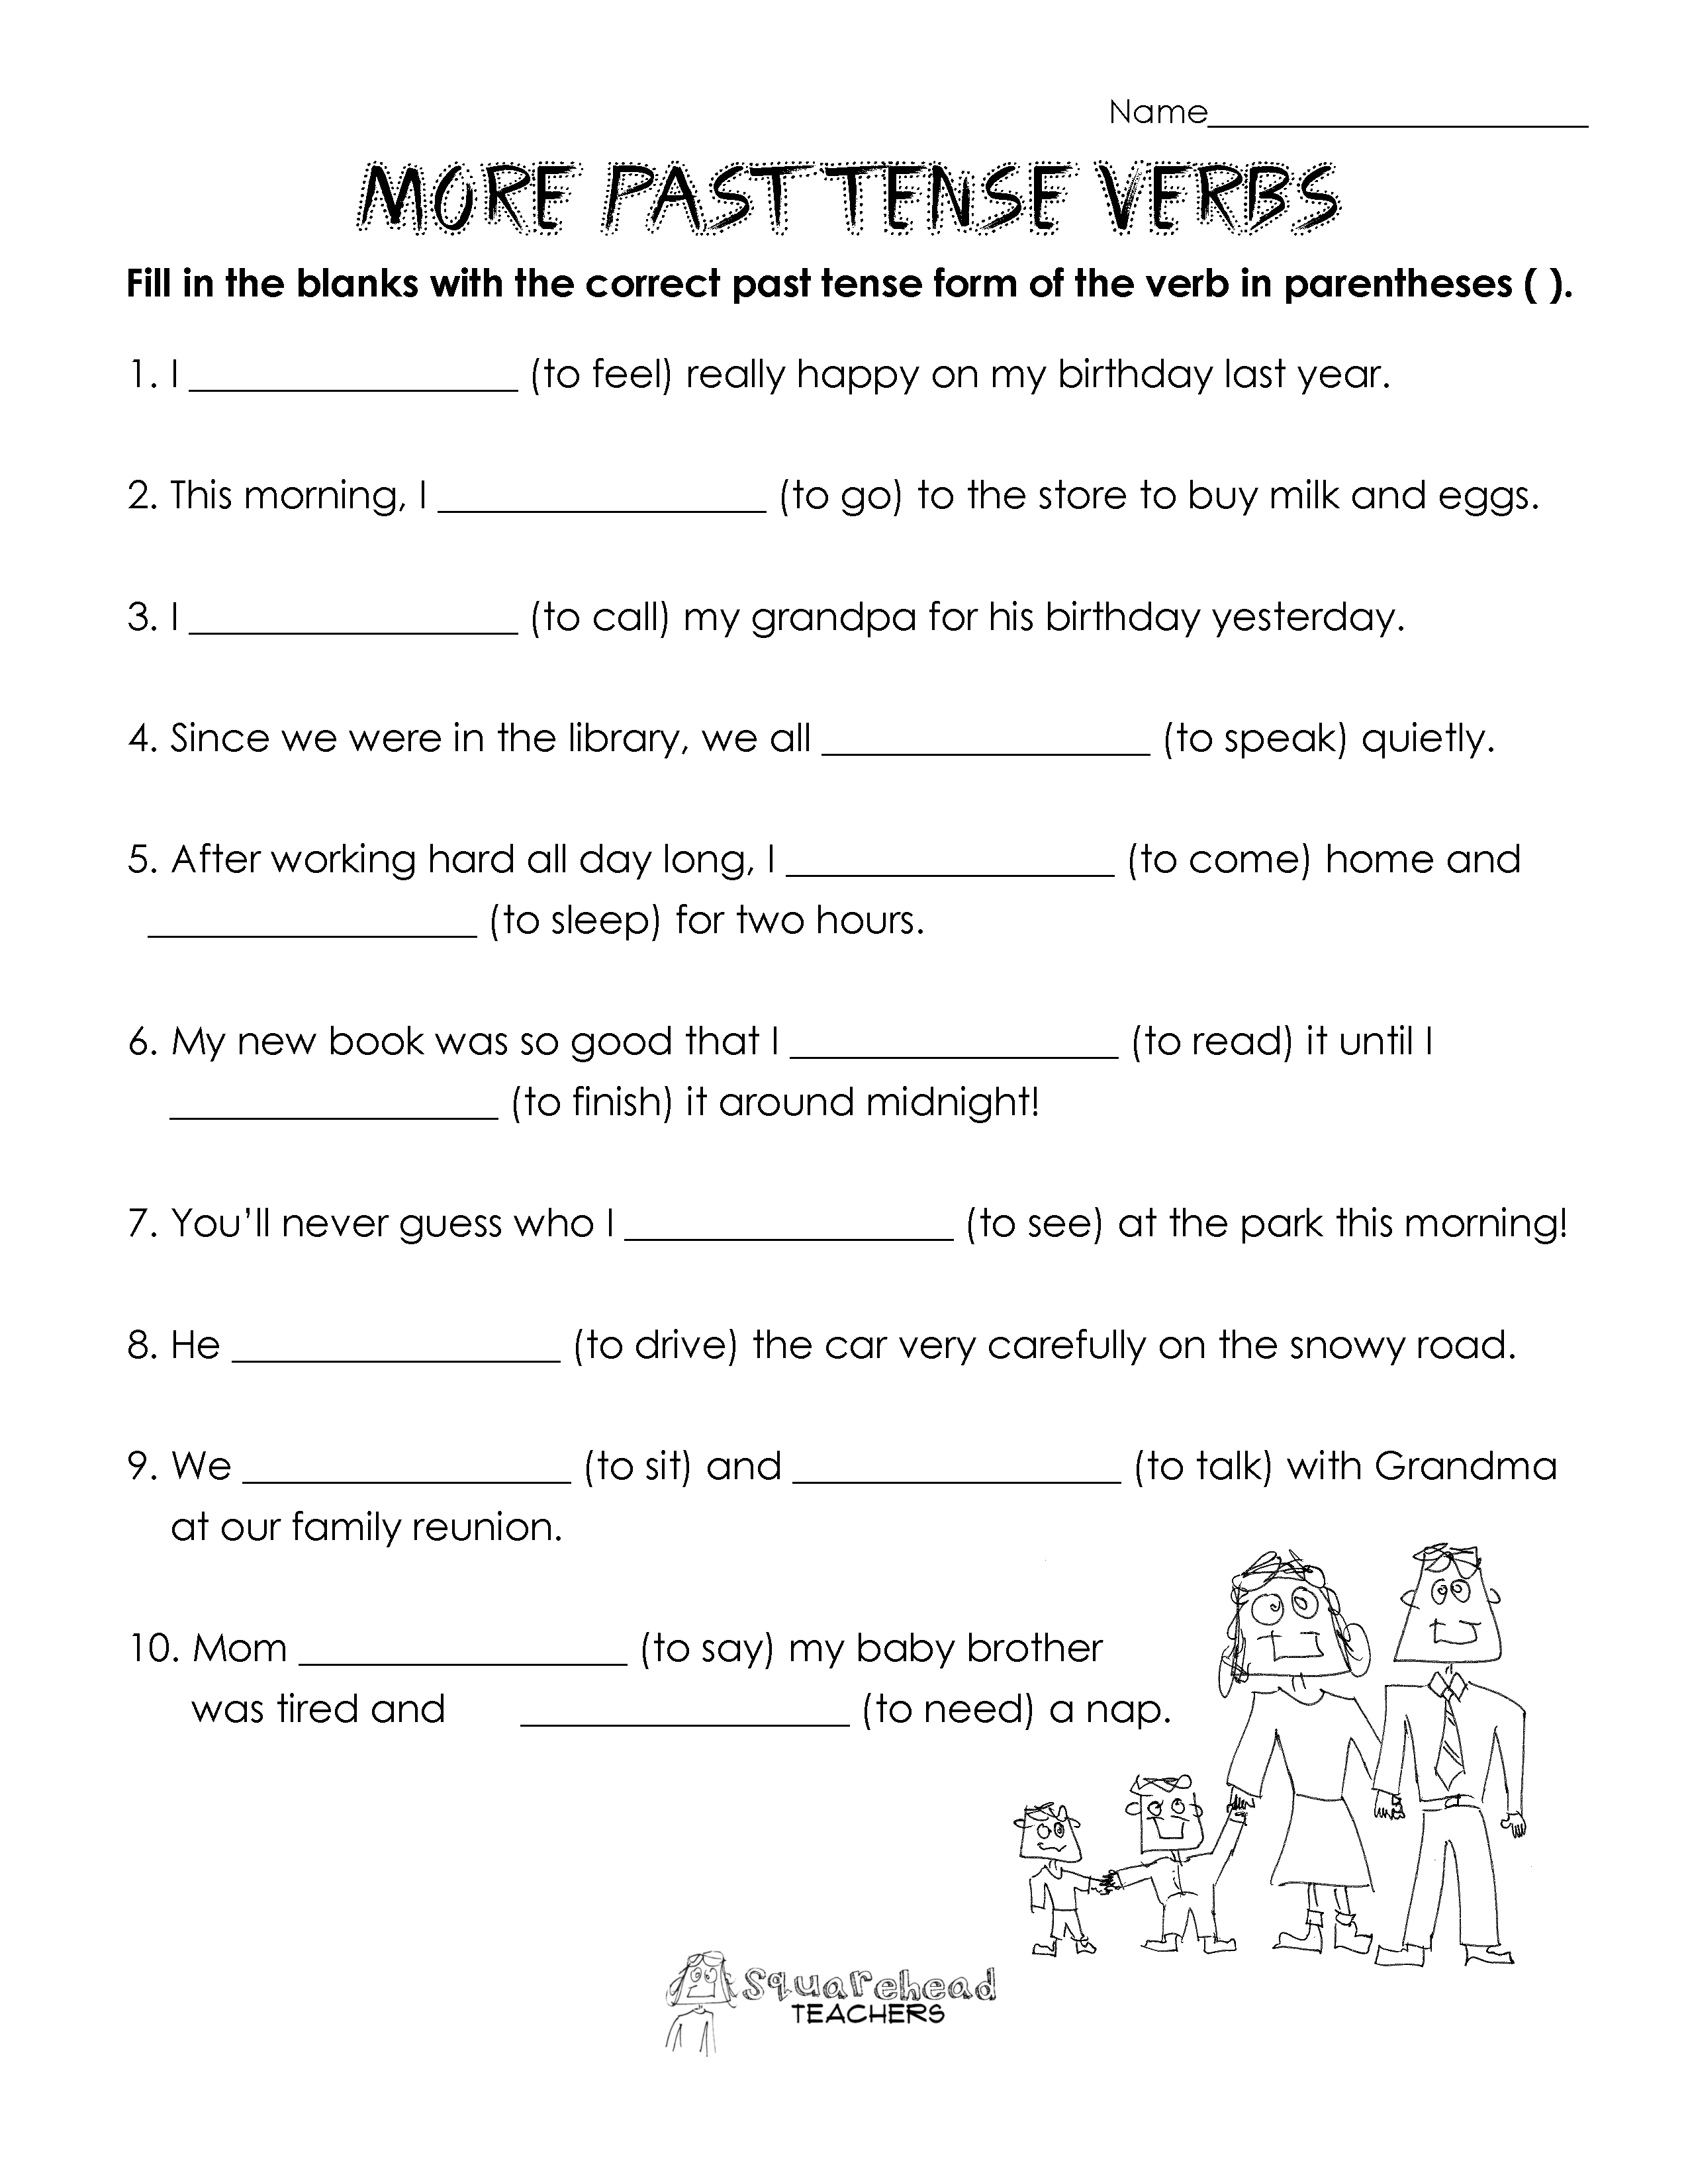 Free Past And Present Tense Verbs Worksheets